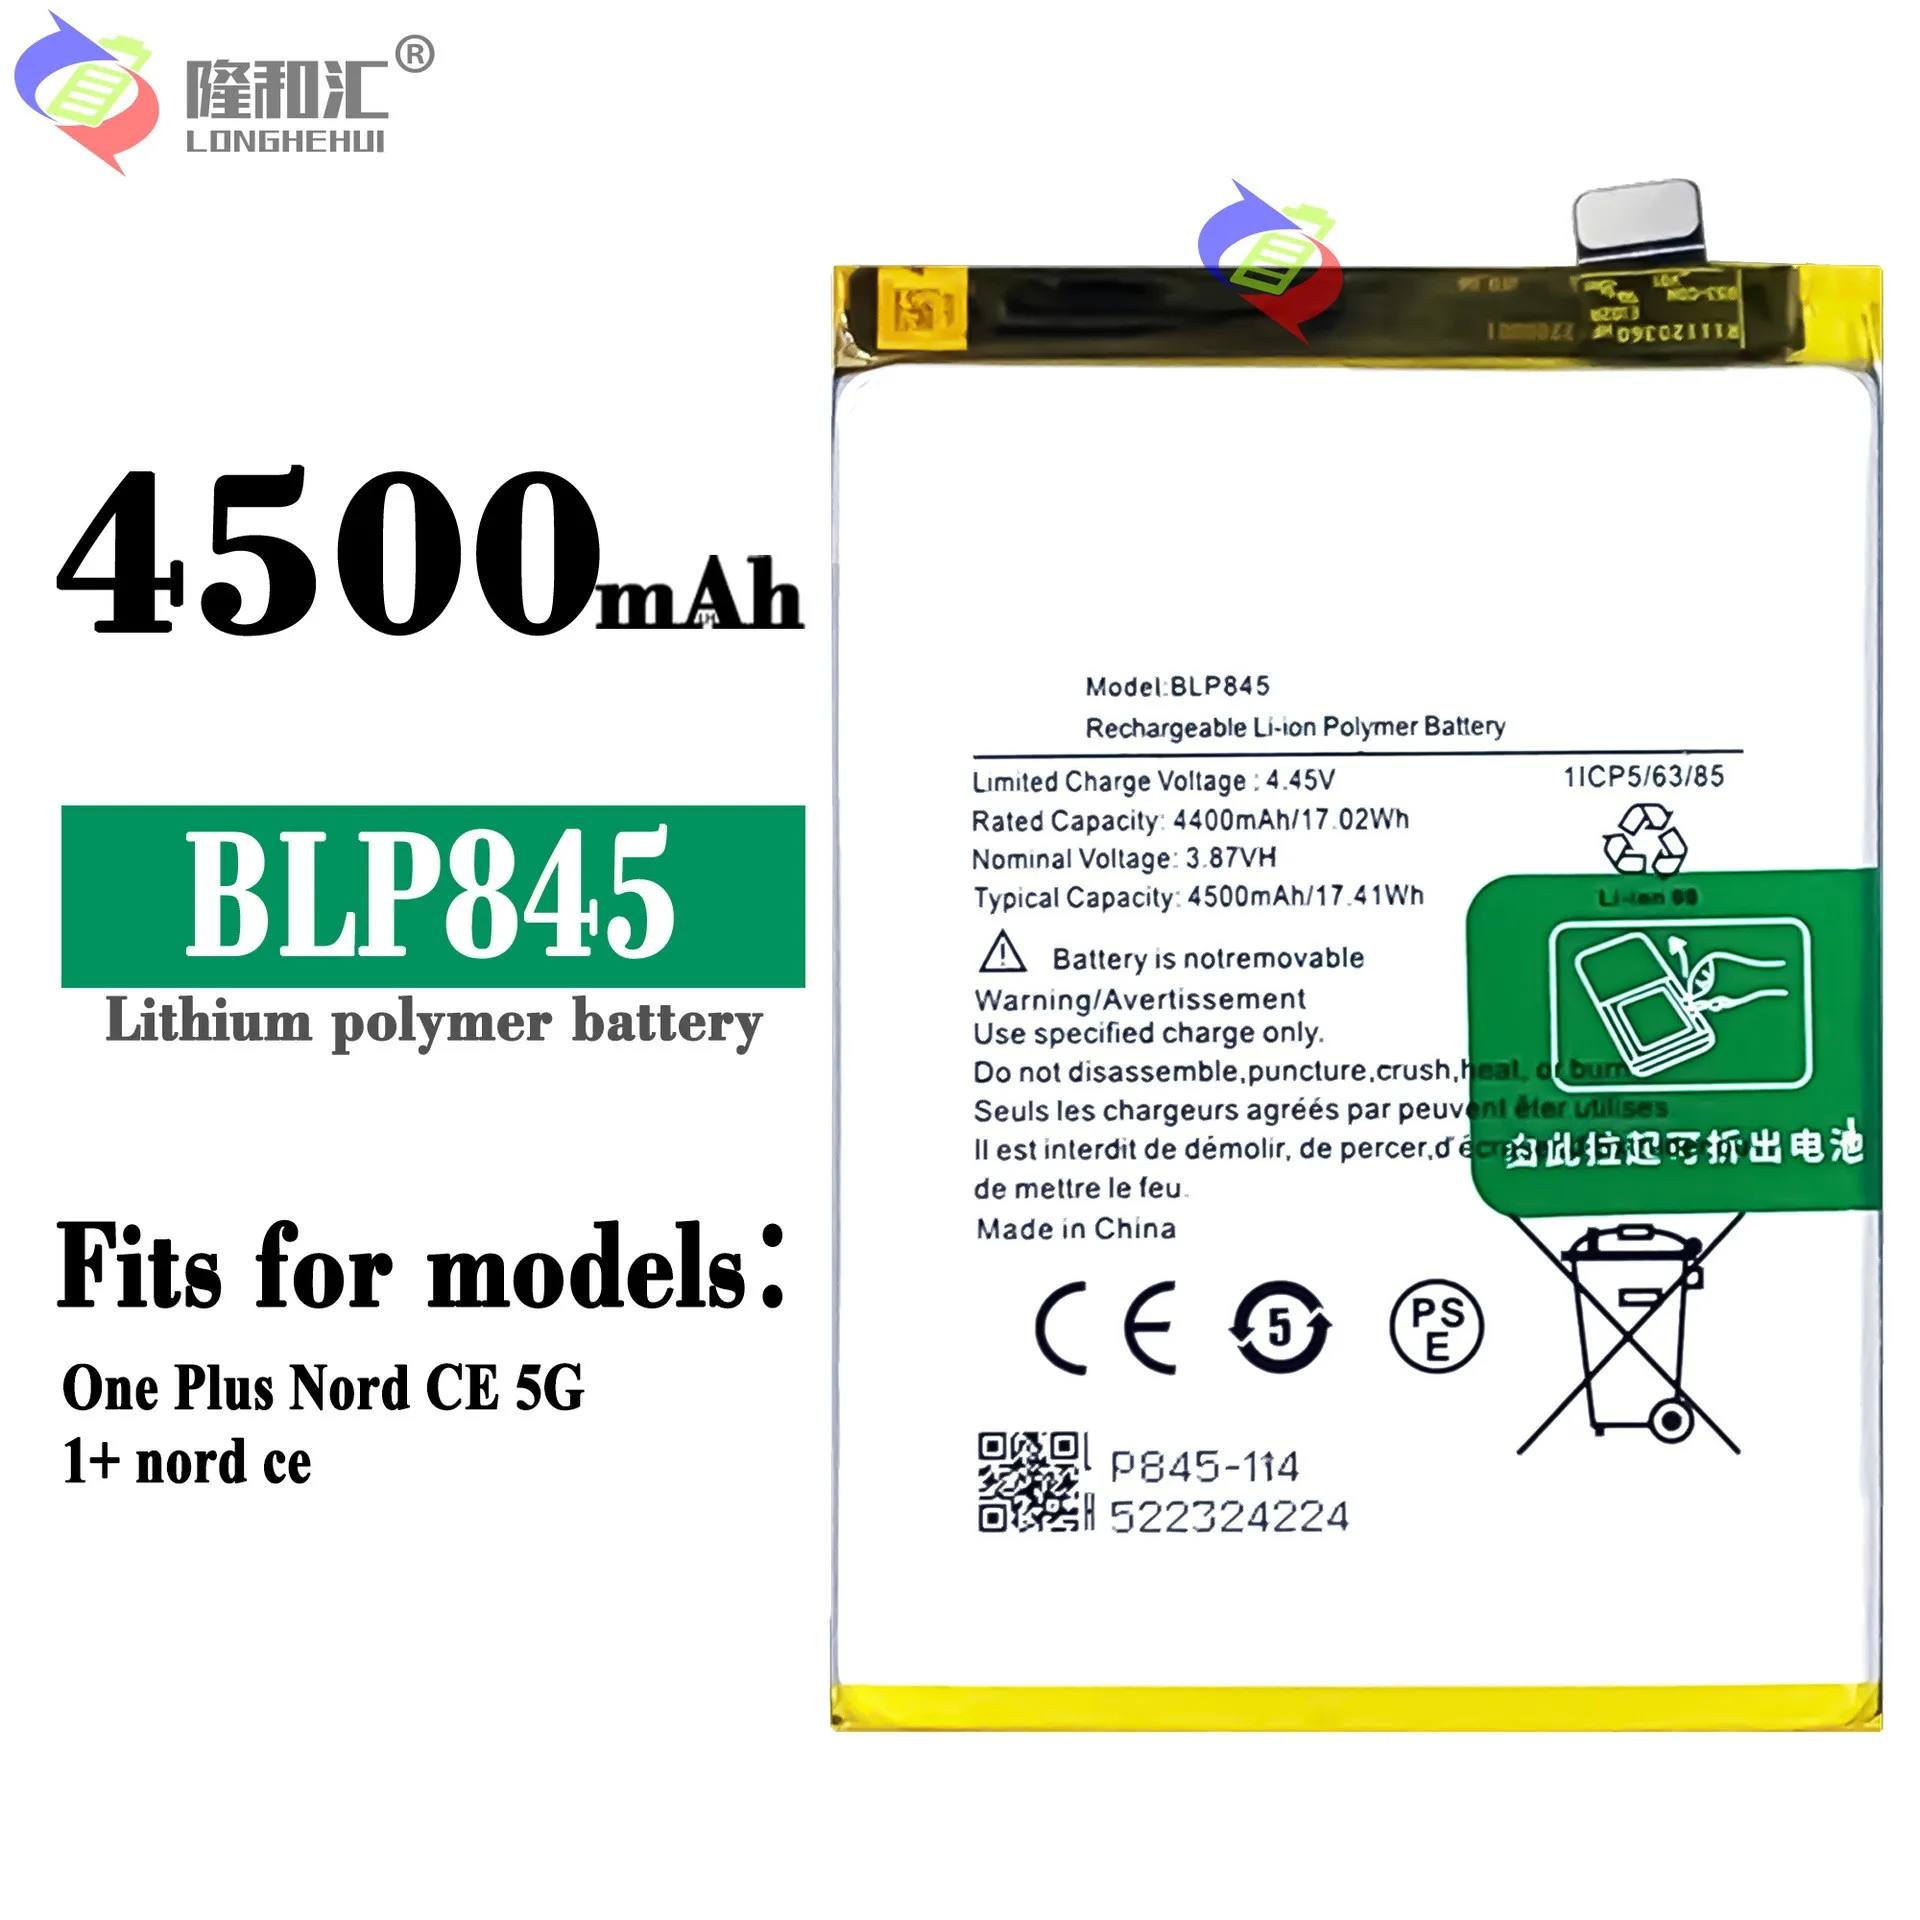 Compatible For OPPO / One Plus Nord CE 5G/1+ nord ce BLP845 4500mAh Phone Battery Series